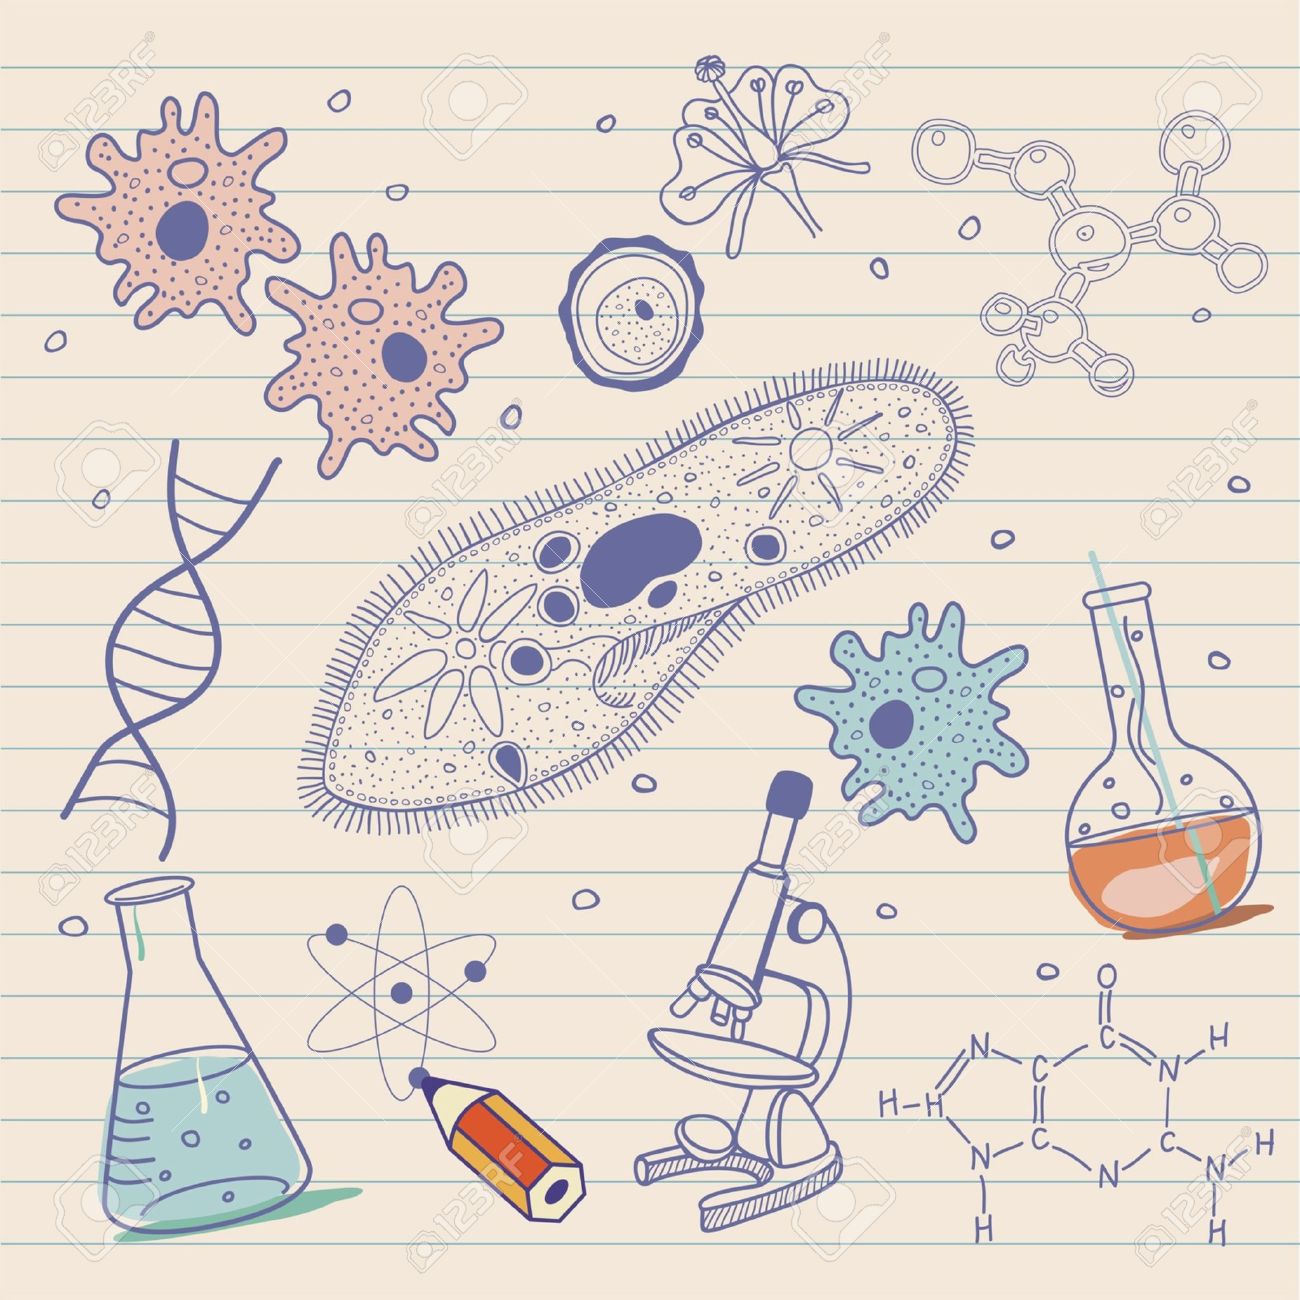 Biology Sketches Background In Vintage Style Royalty Free Cliparts